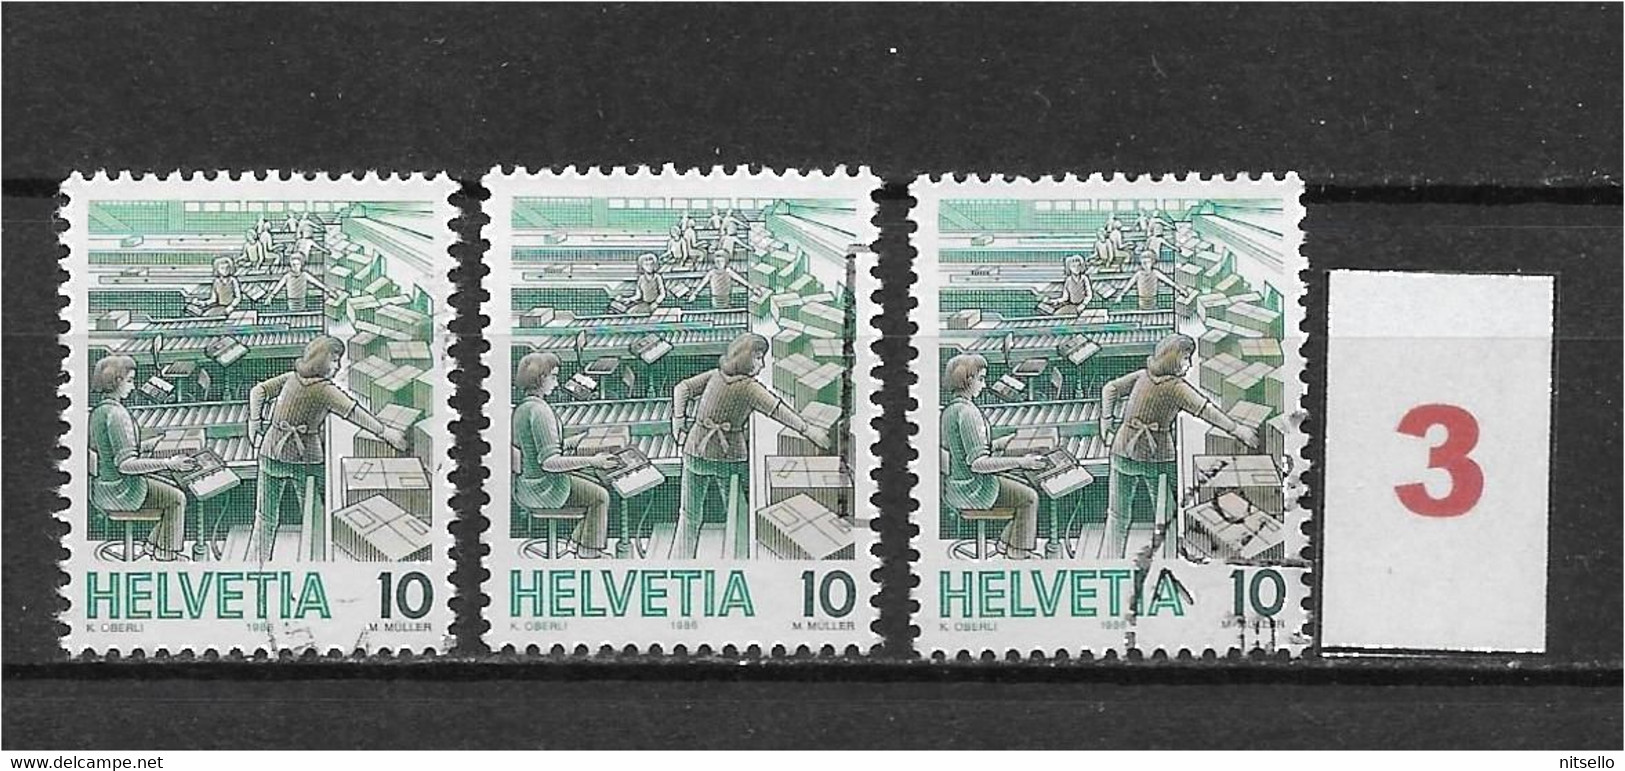 LOTE 1530A /// SUIZA YVERT Nº: 1251 - CATALOG./COTE: 2,40€ ¡¡¡ OFERTA - LIQUIDATION - JE LIQUIDE !!! - Used Stamps